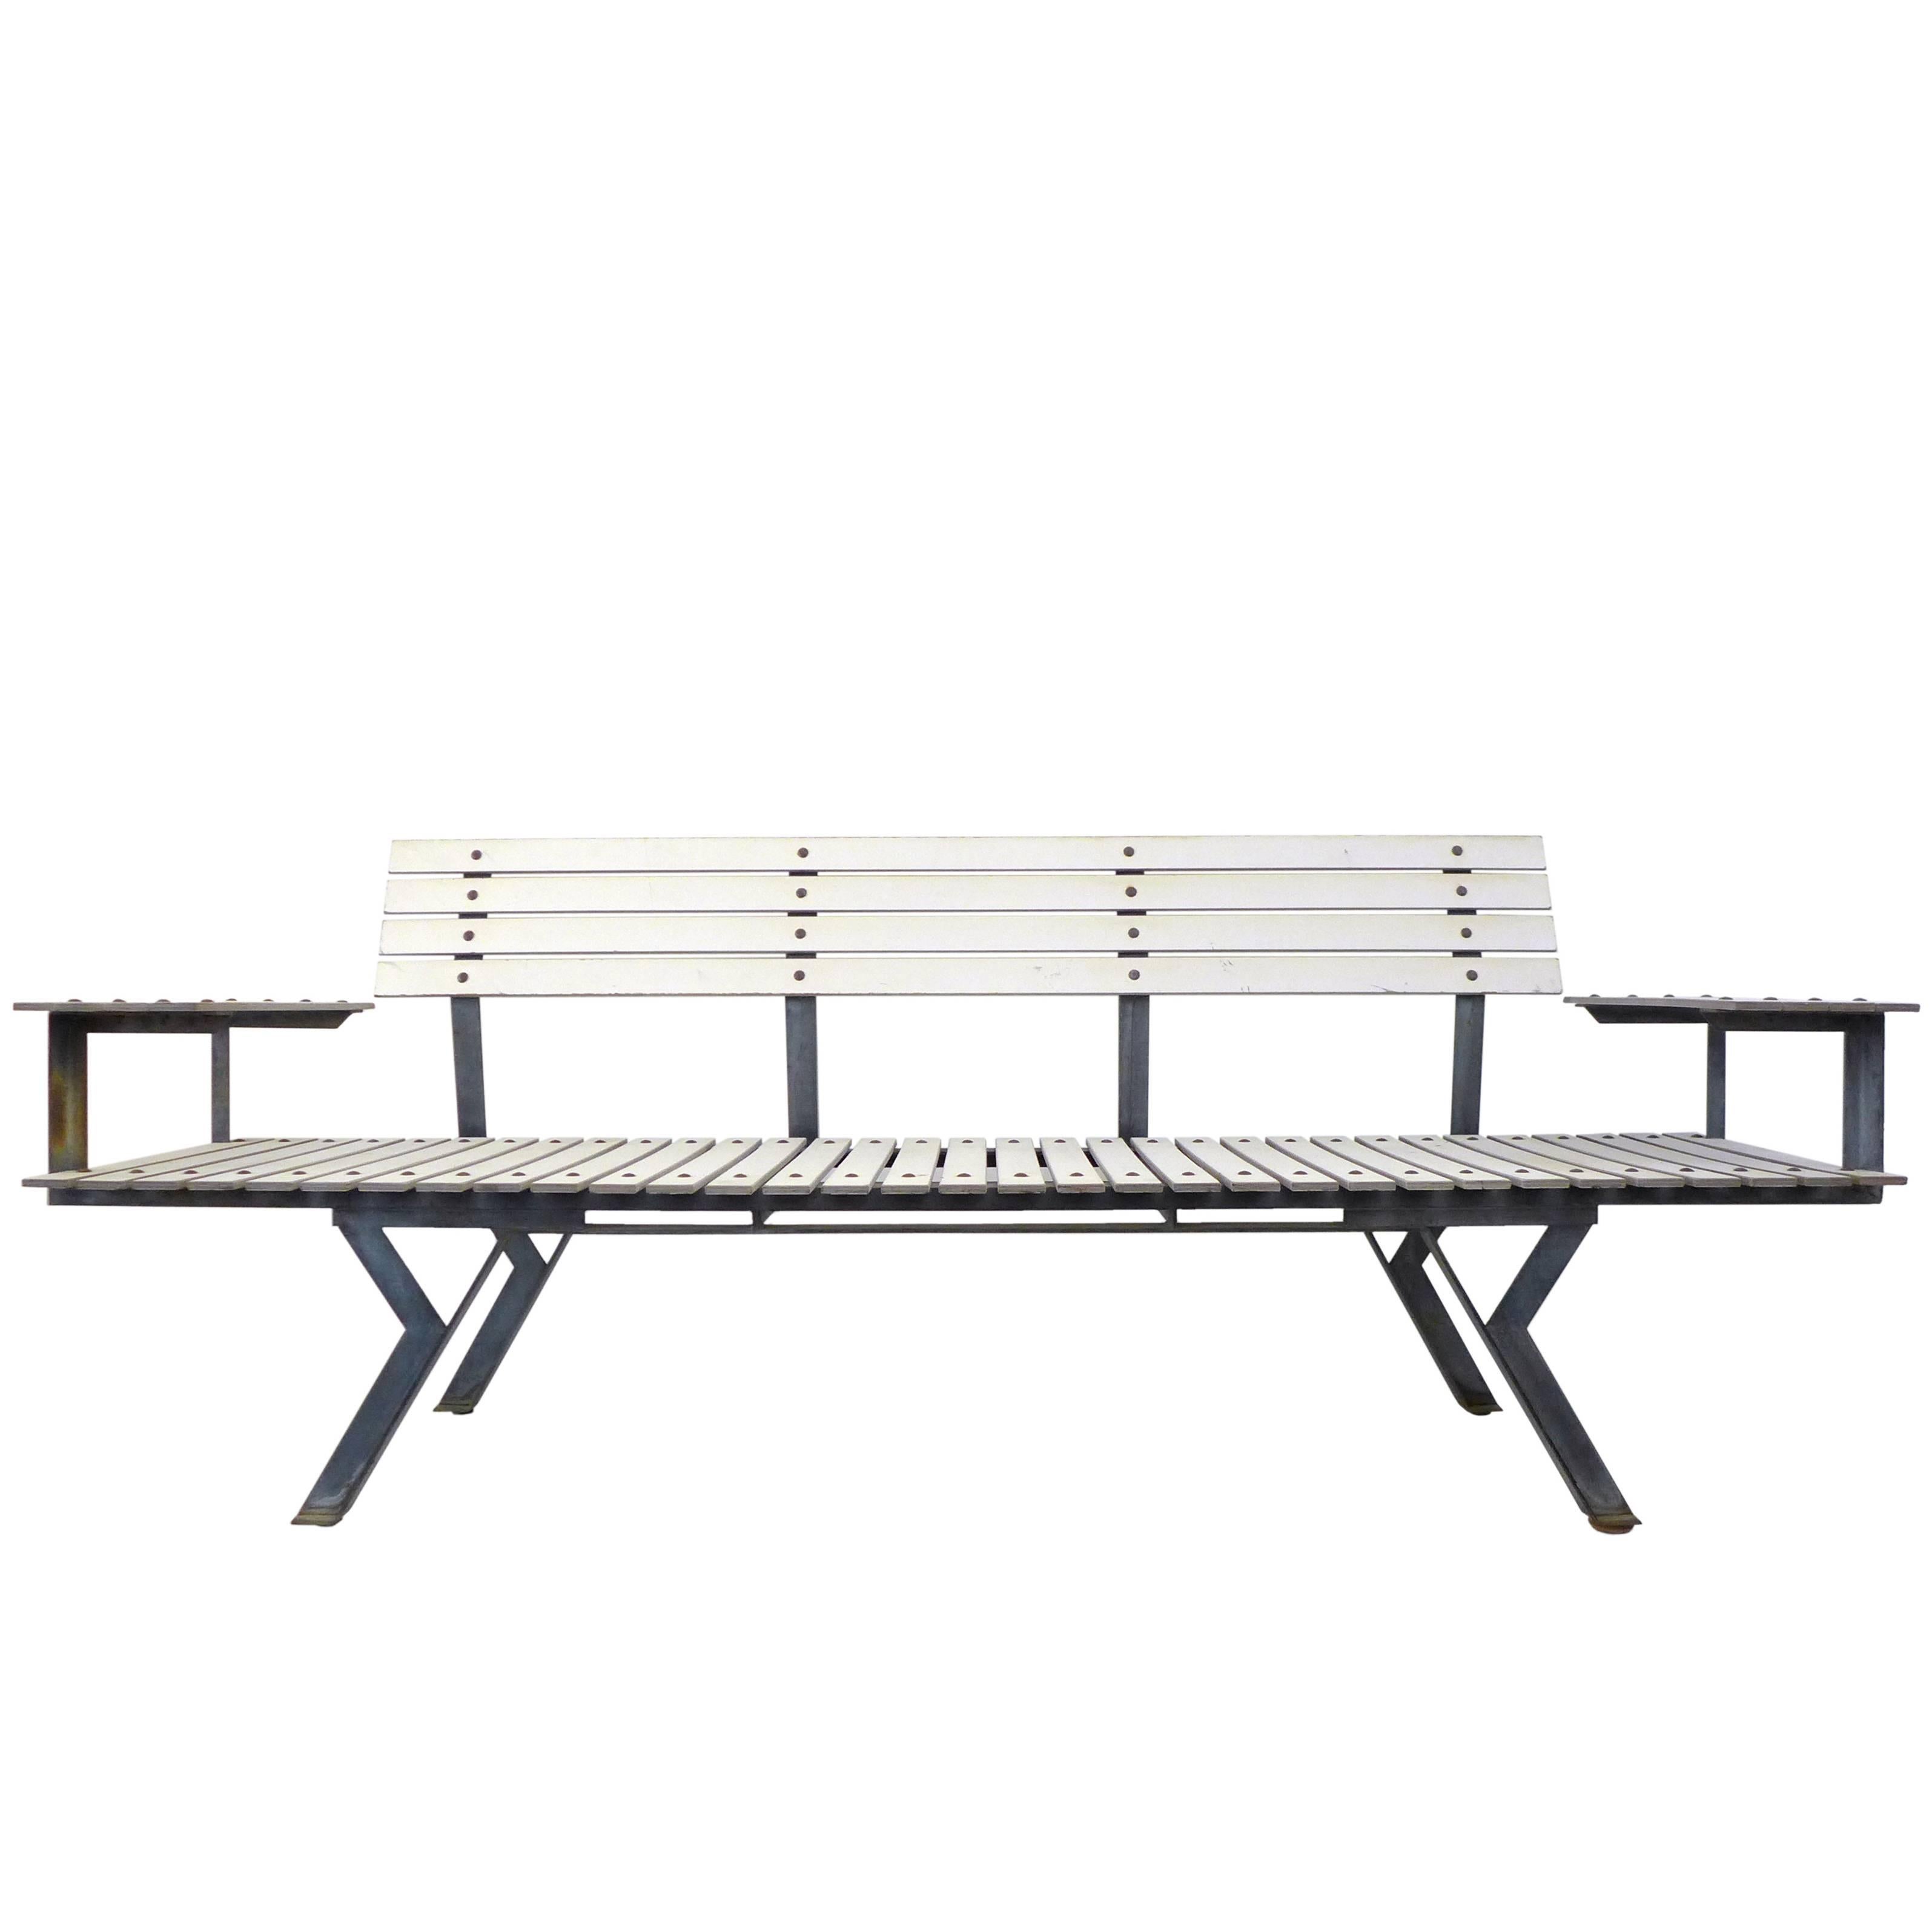 Architecturally Inspired Welded Steel and Wood Slat Bench